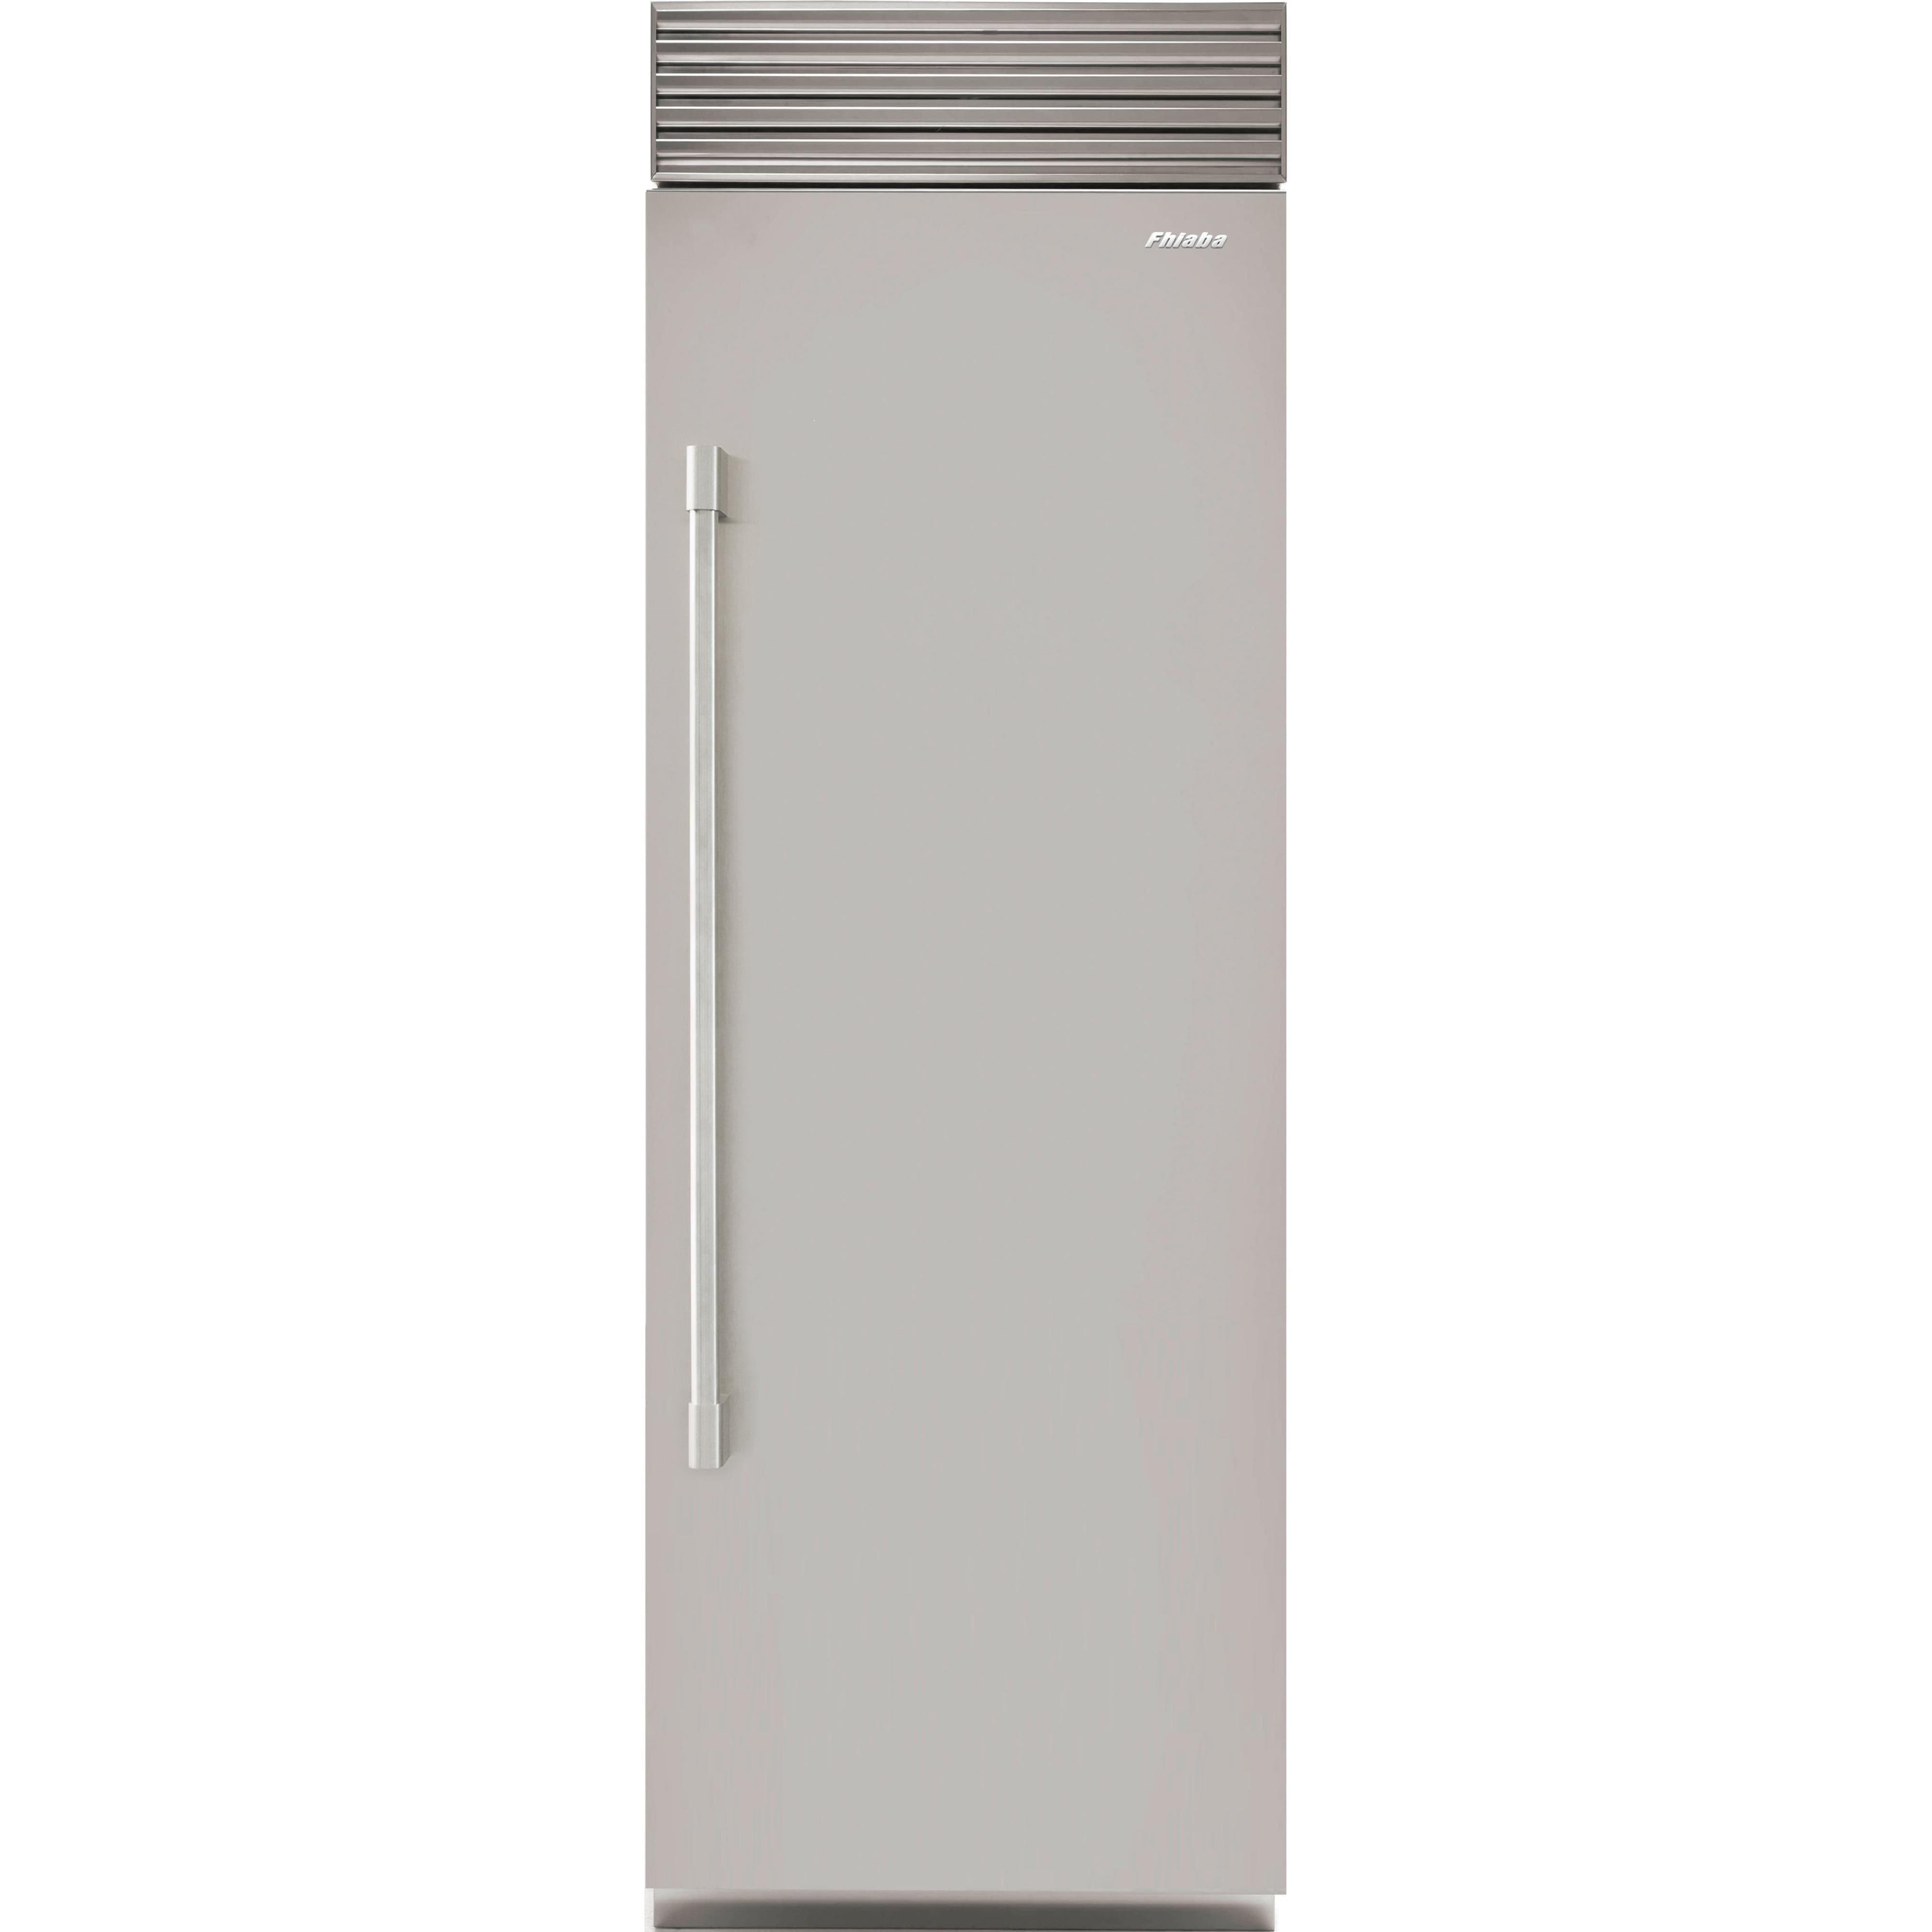 Fhiaba 30-inch, 17.44 cu. ft. Built-in All Refrigerator with Smart touch TFT Display FP30RFC-RS2 Refrigerators FP30RFCRS2 Luxury Appliances Direct